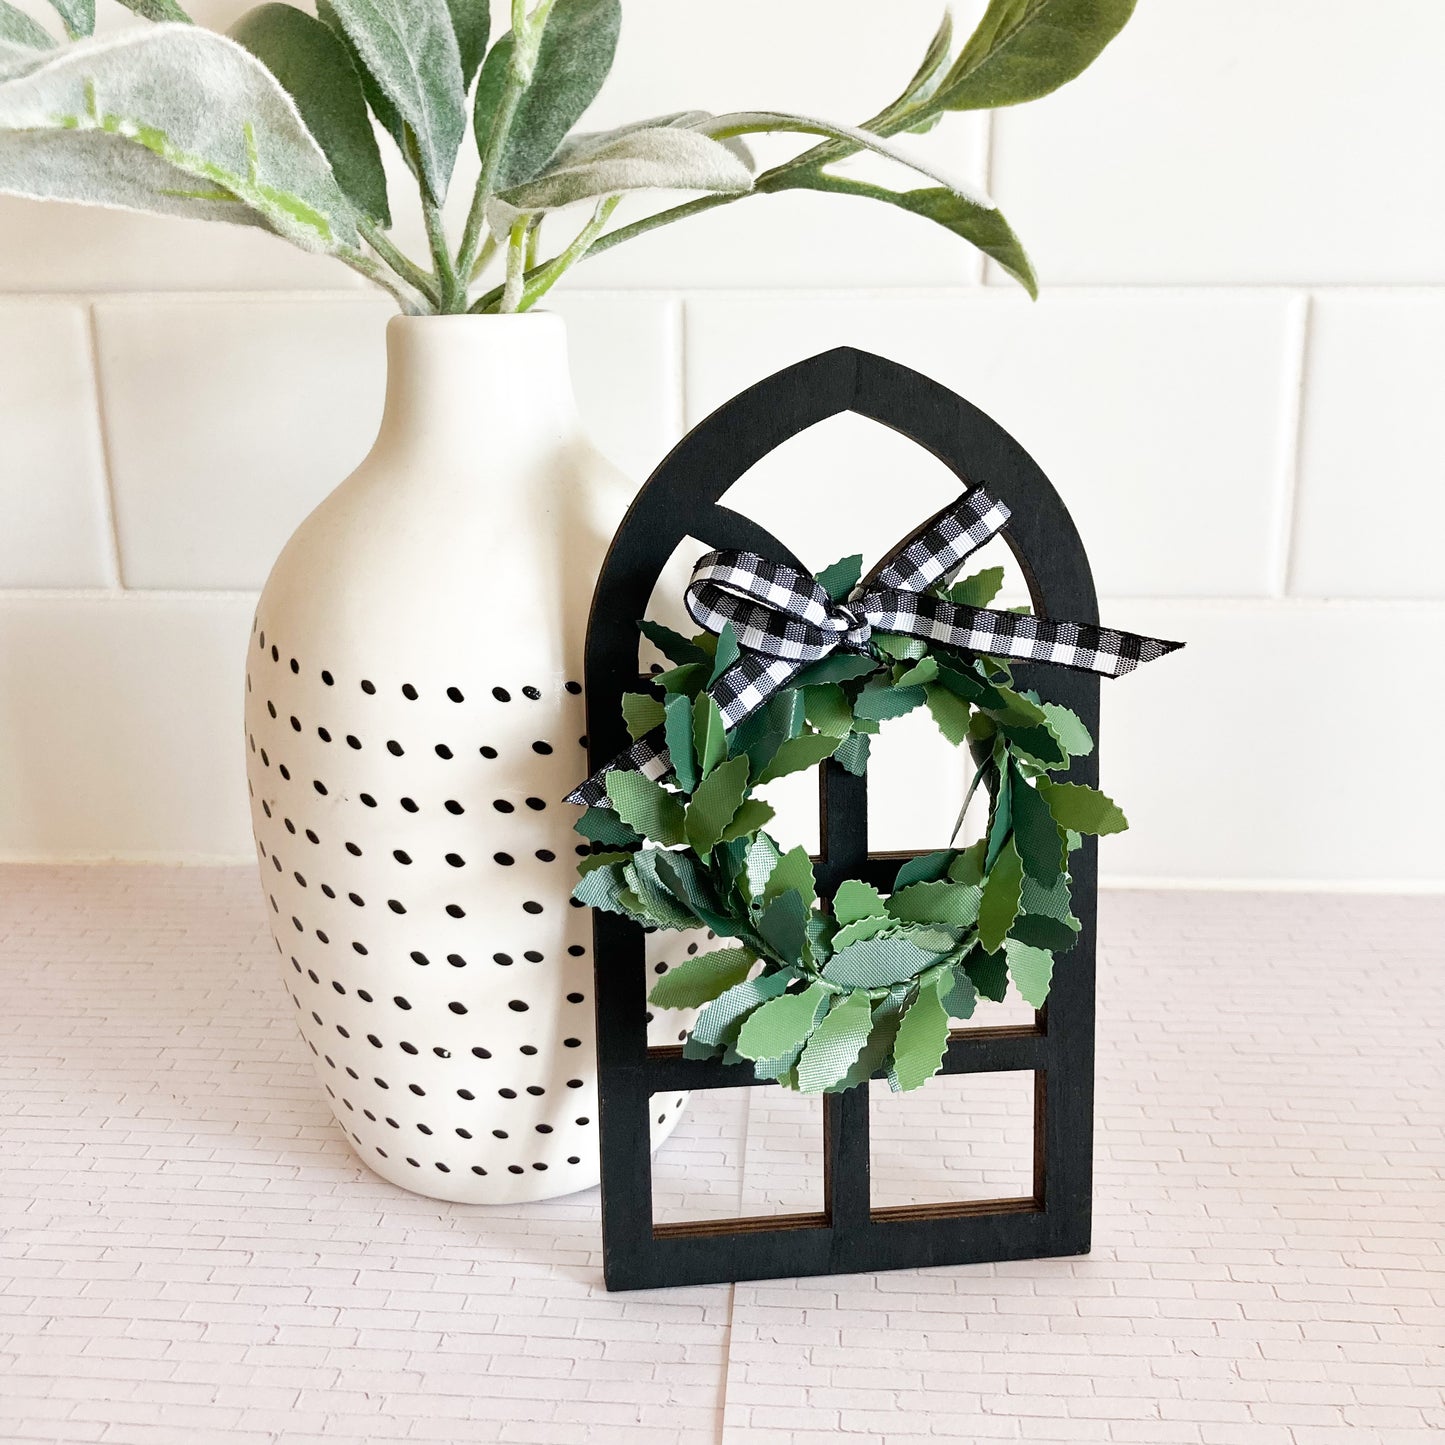 Handmade mini cathedral window shelf sitter 3"x6" 1/4" thick color black decorated with wreath greenery and buffalo checkered bow